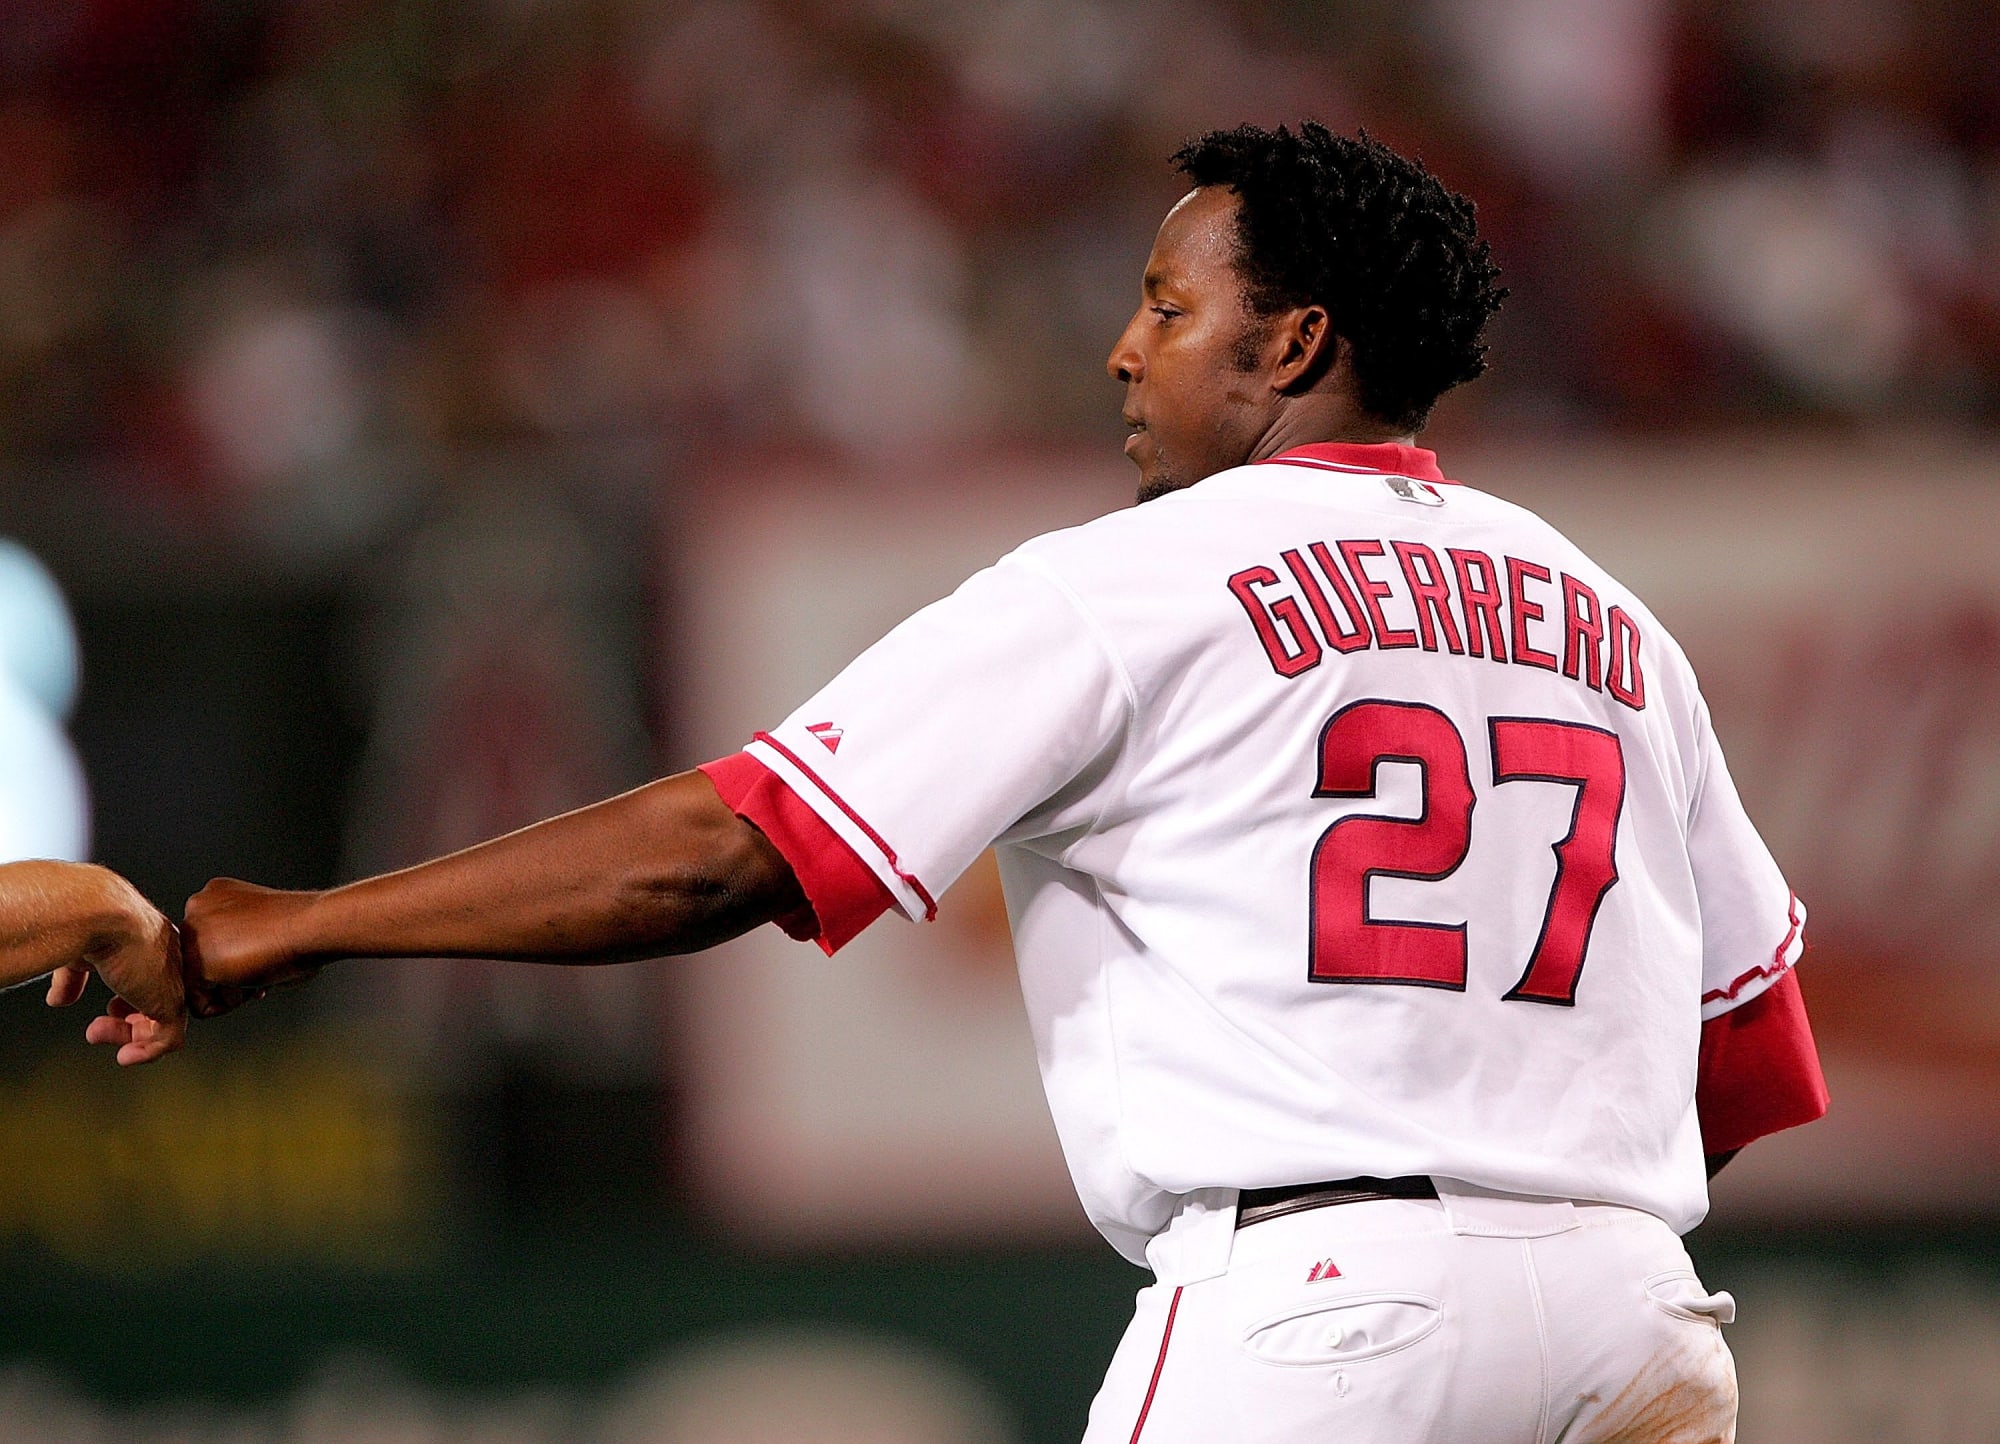 Ranking Vladimir Guerrero and the best Angels' hitters of all-time